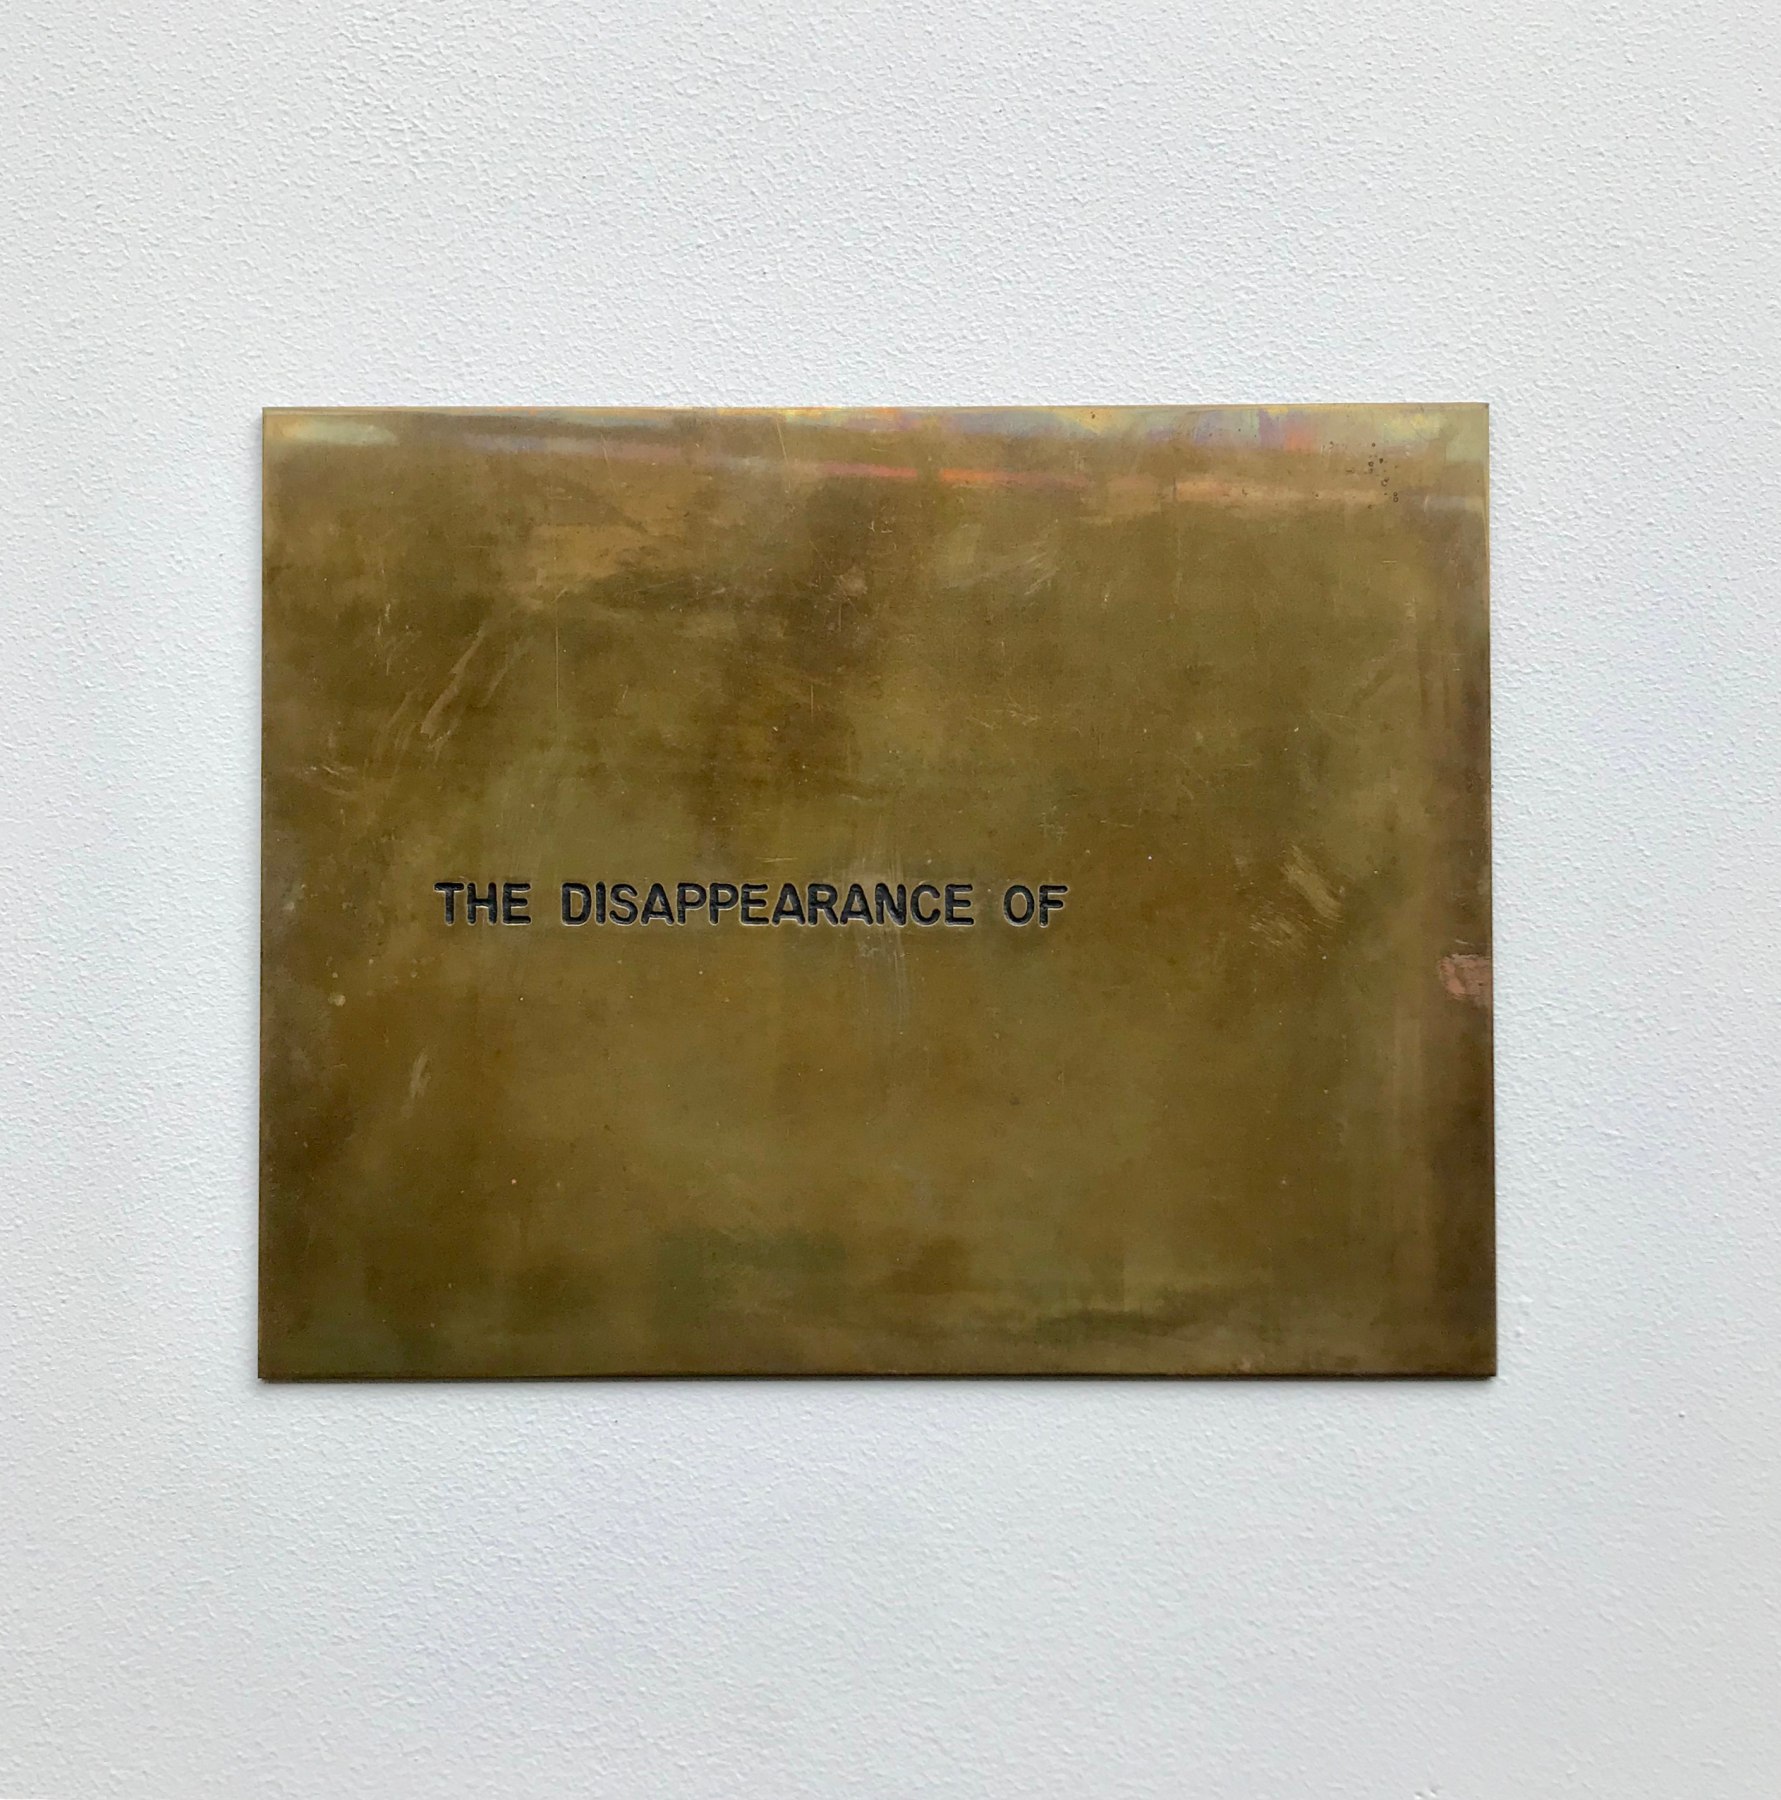 Luis Camnitzer, The Disappearance of..., 1971-1973